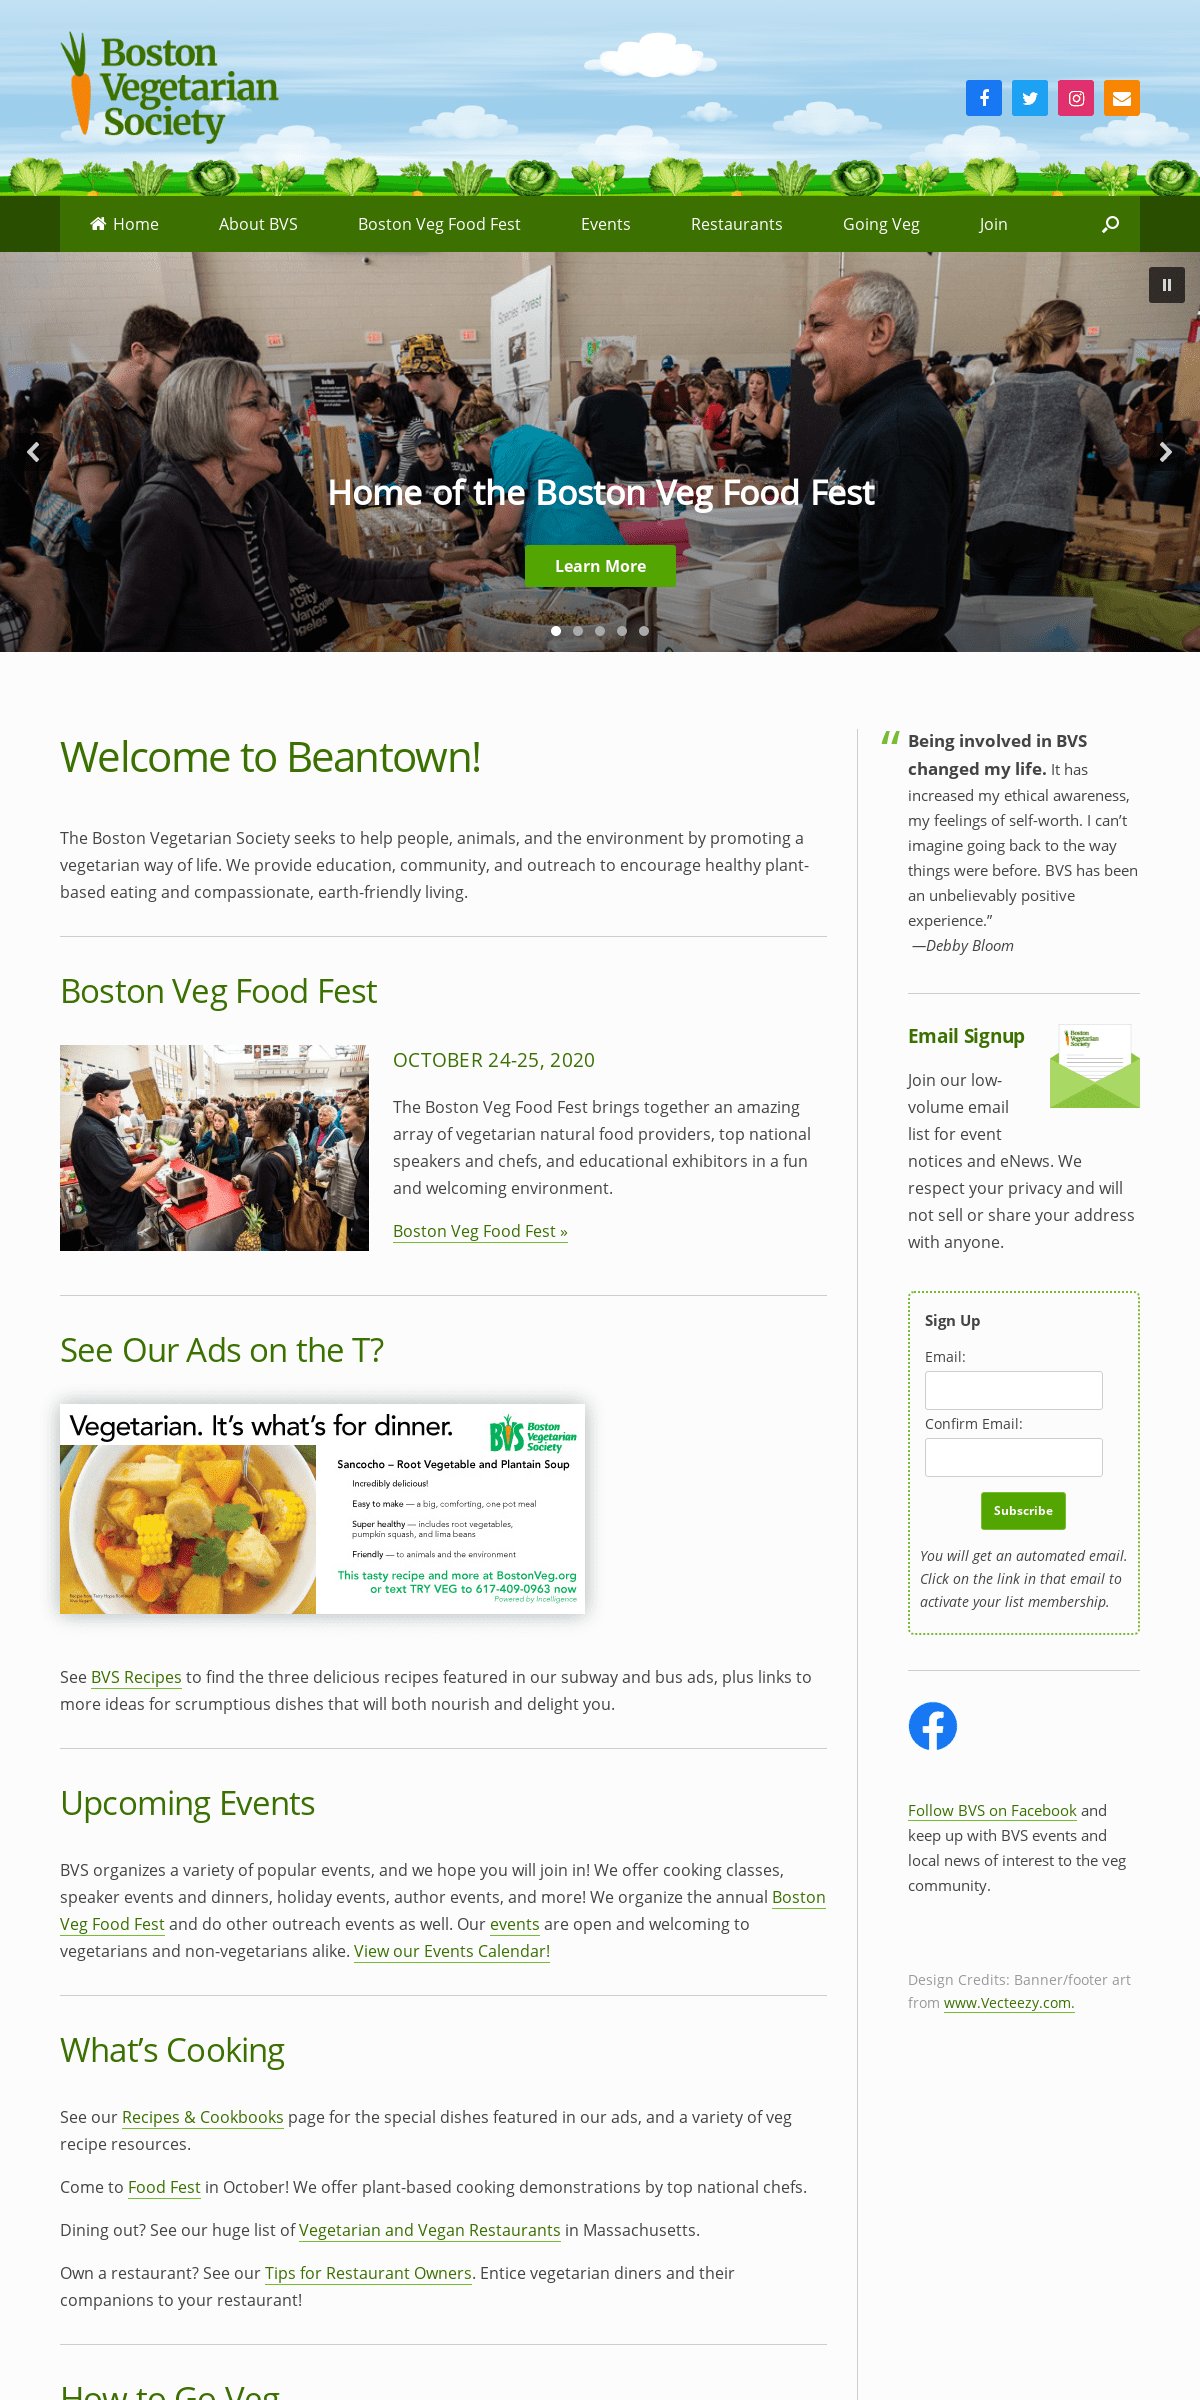 A complete backup of bostonveg.org